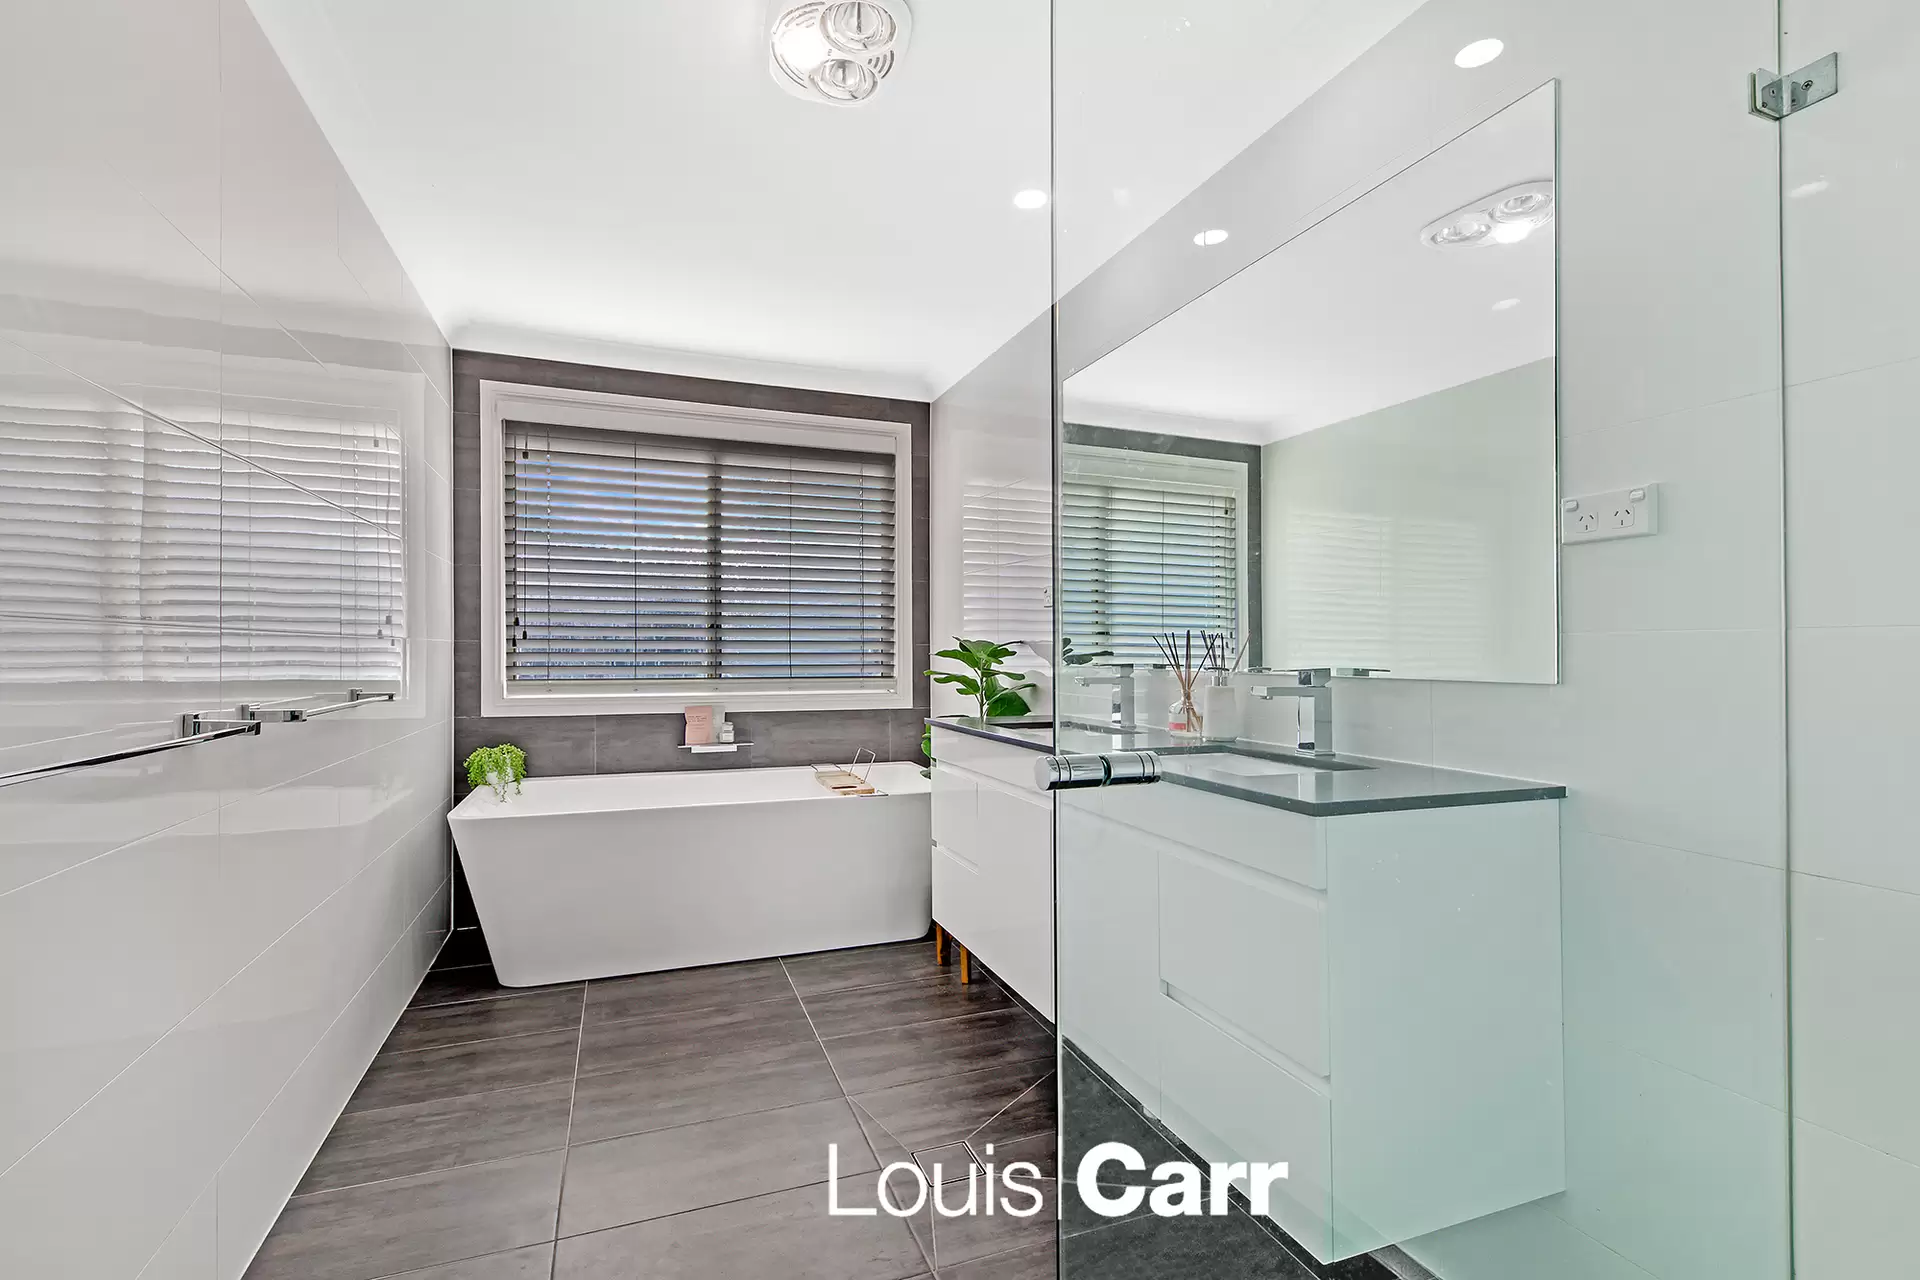 Photo #12: 4 Rooke Court, Kellyville - Sold by Louis Carr Real Estate